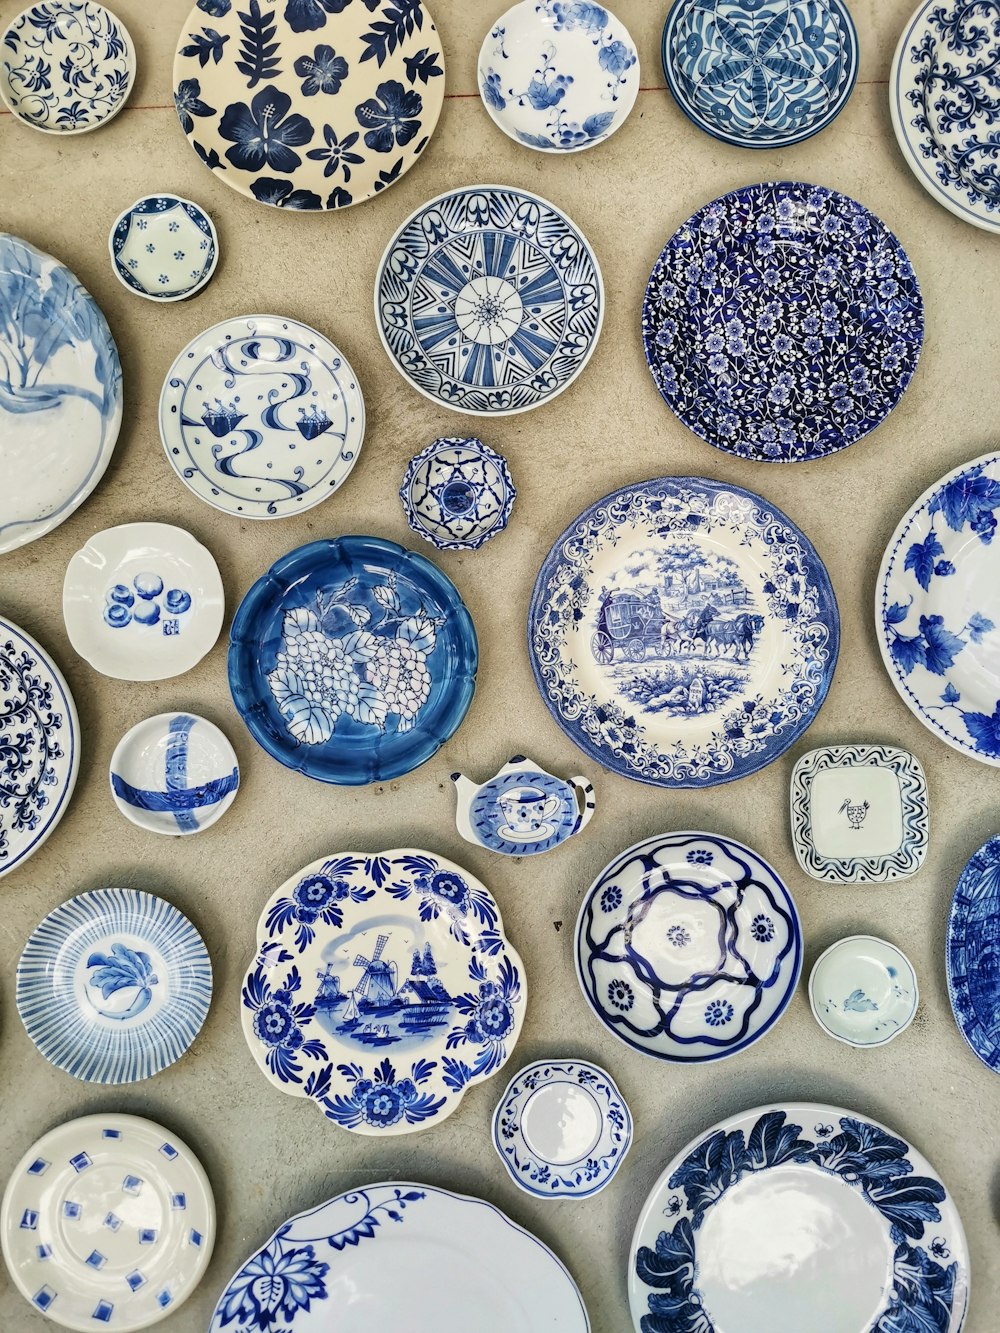 blue and white ceramic plate